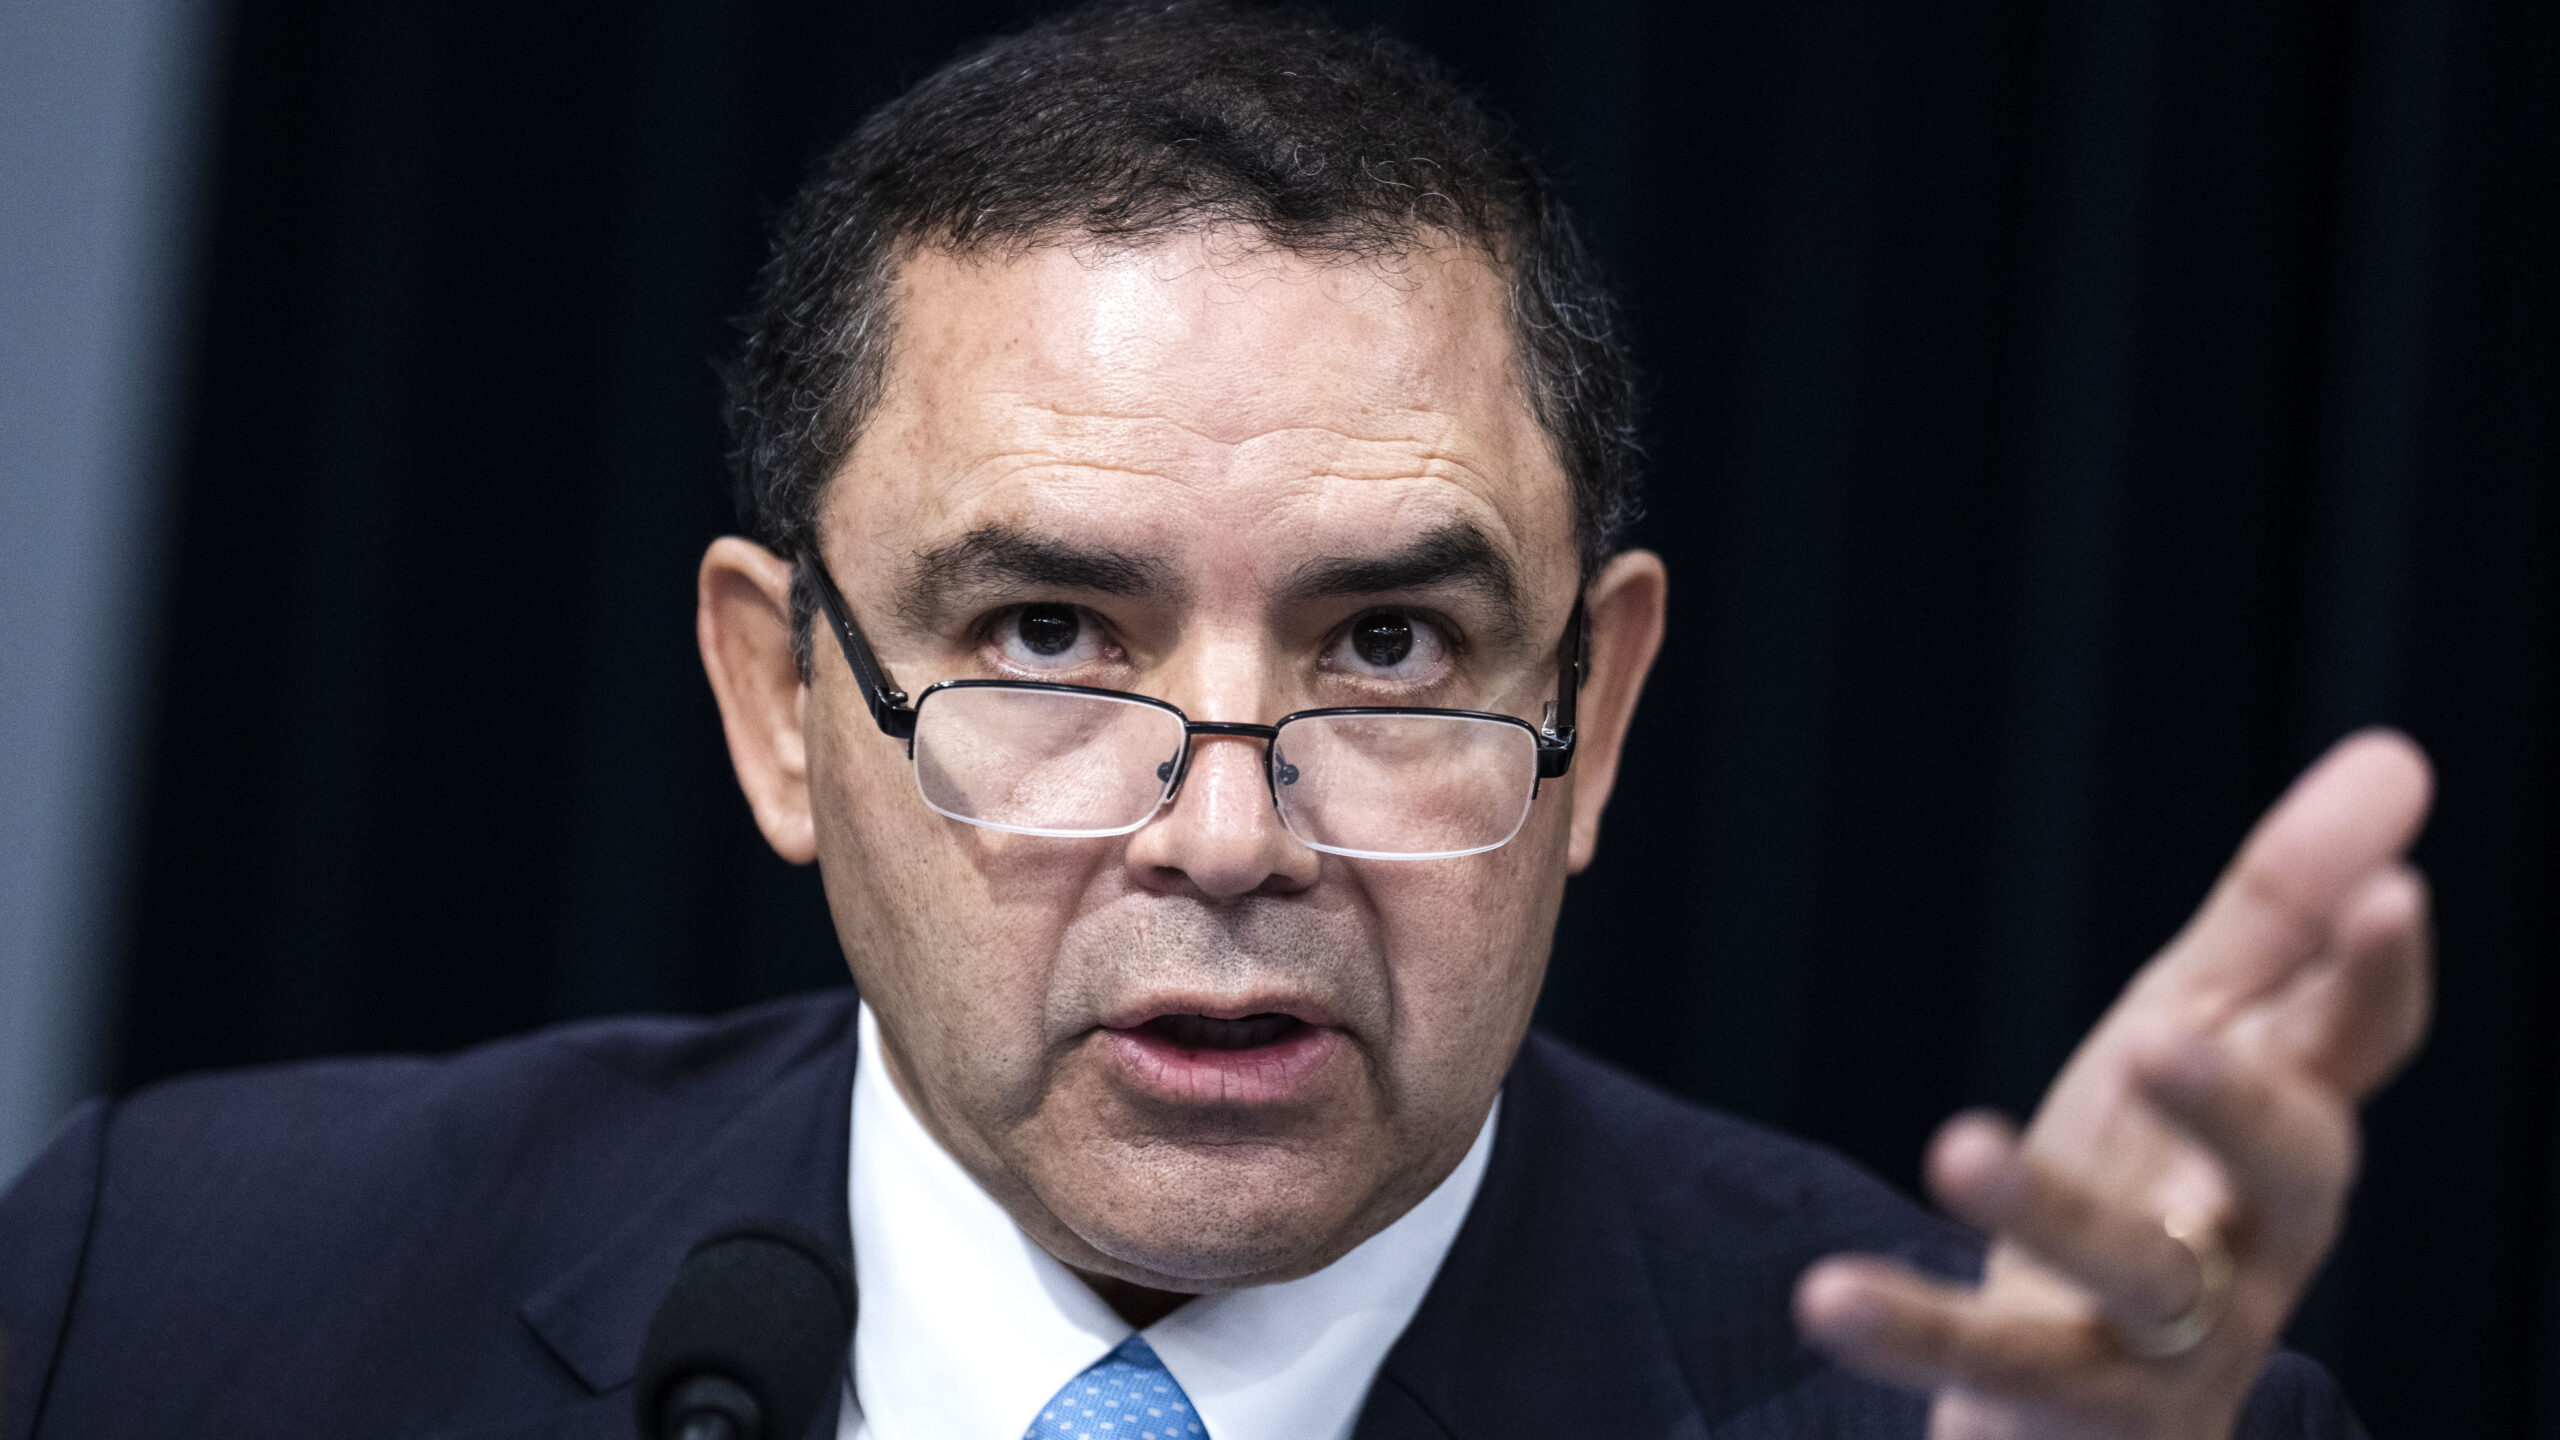 Cuellar, a Democrat, criticizes Biden on border: “No images of people going back, only people coming in.”